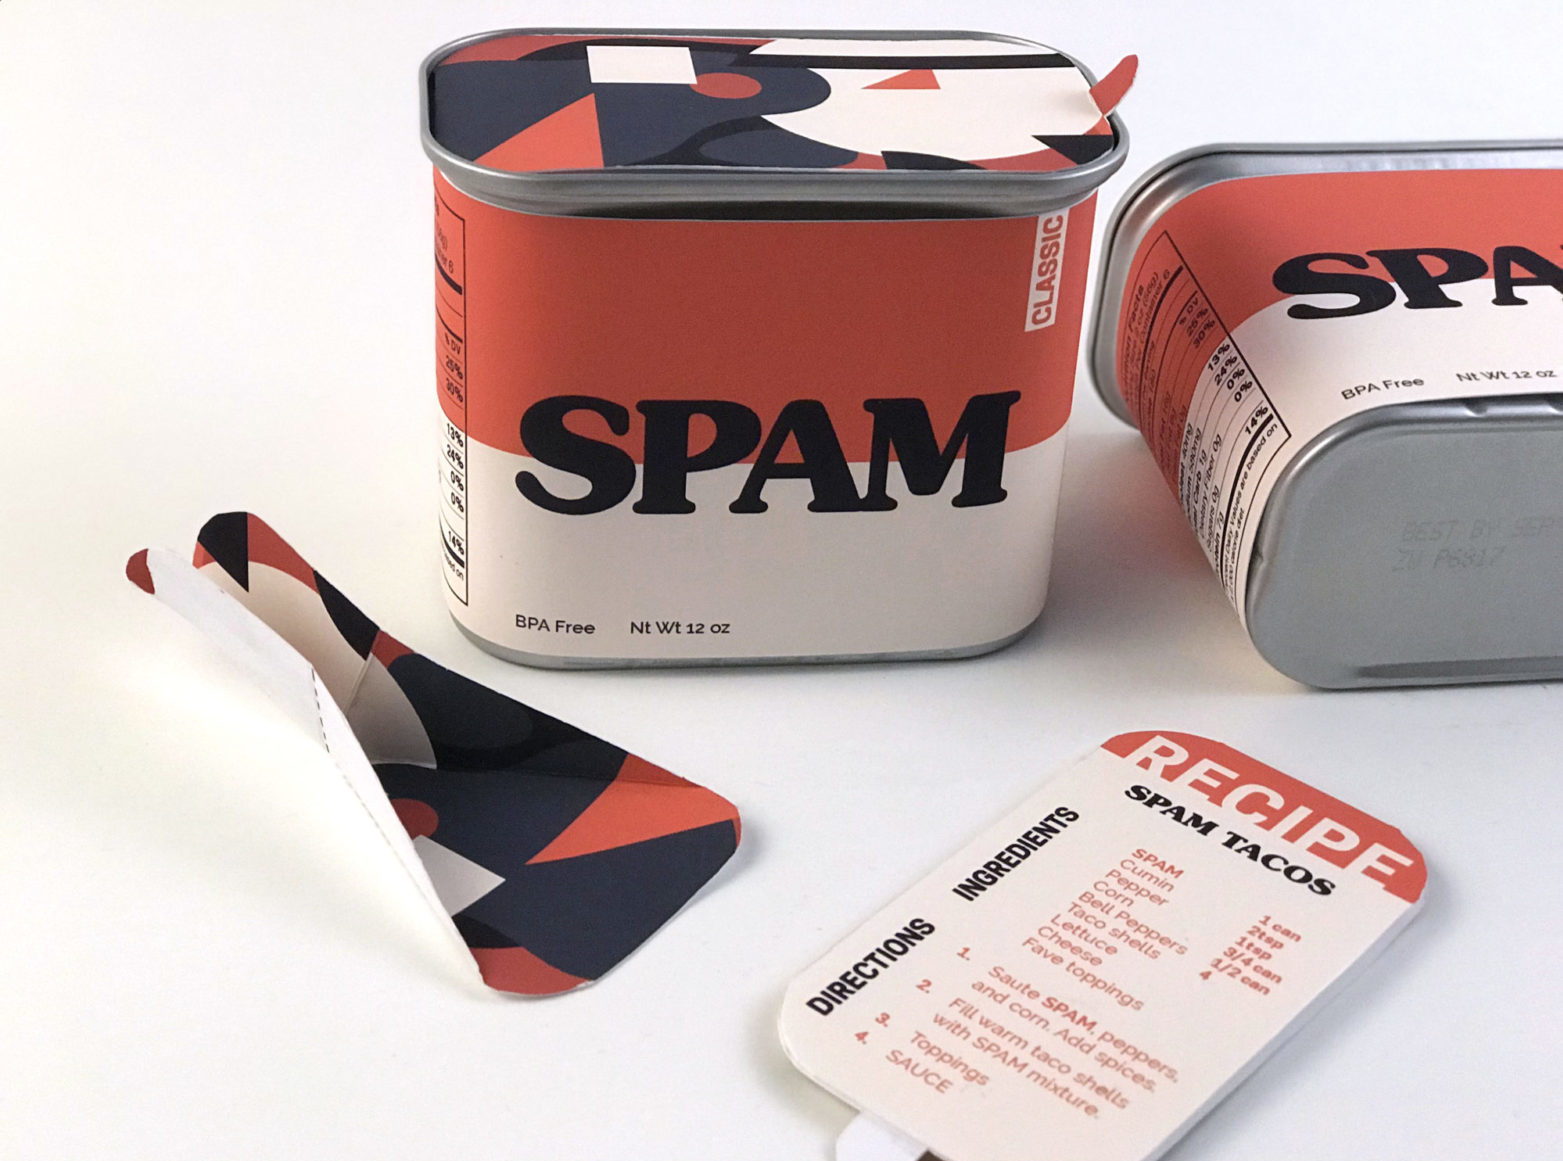 SPAM-packaging-close-up-1